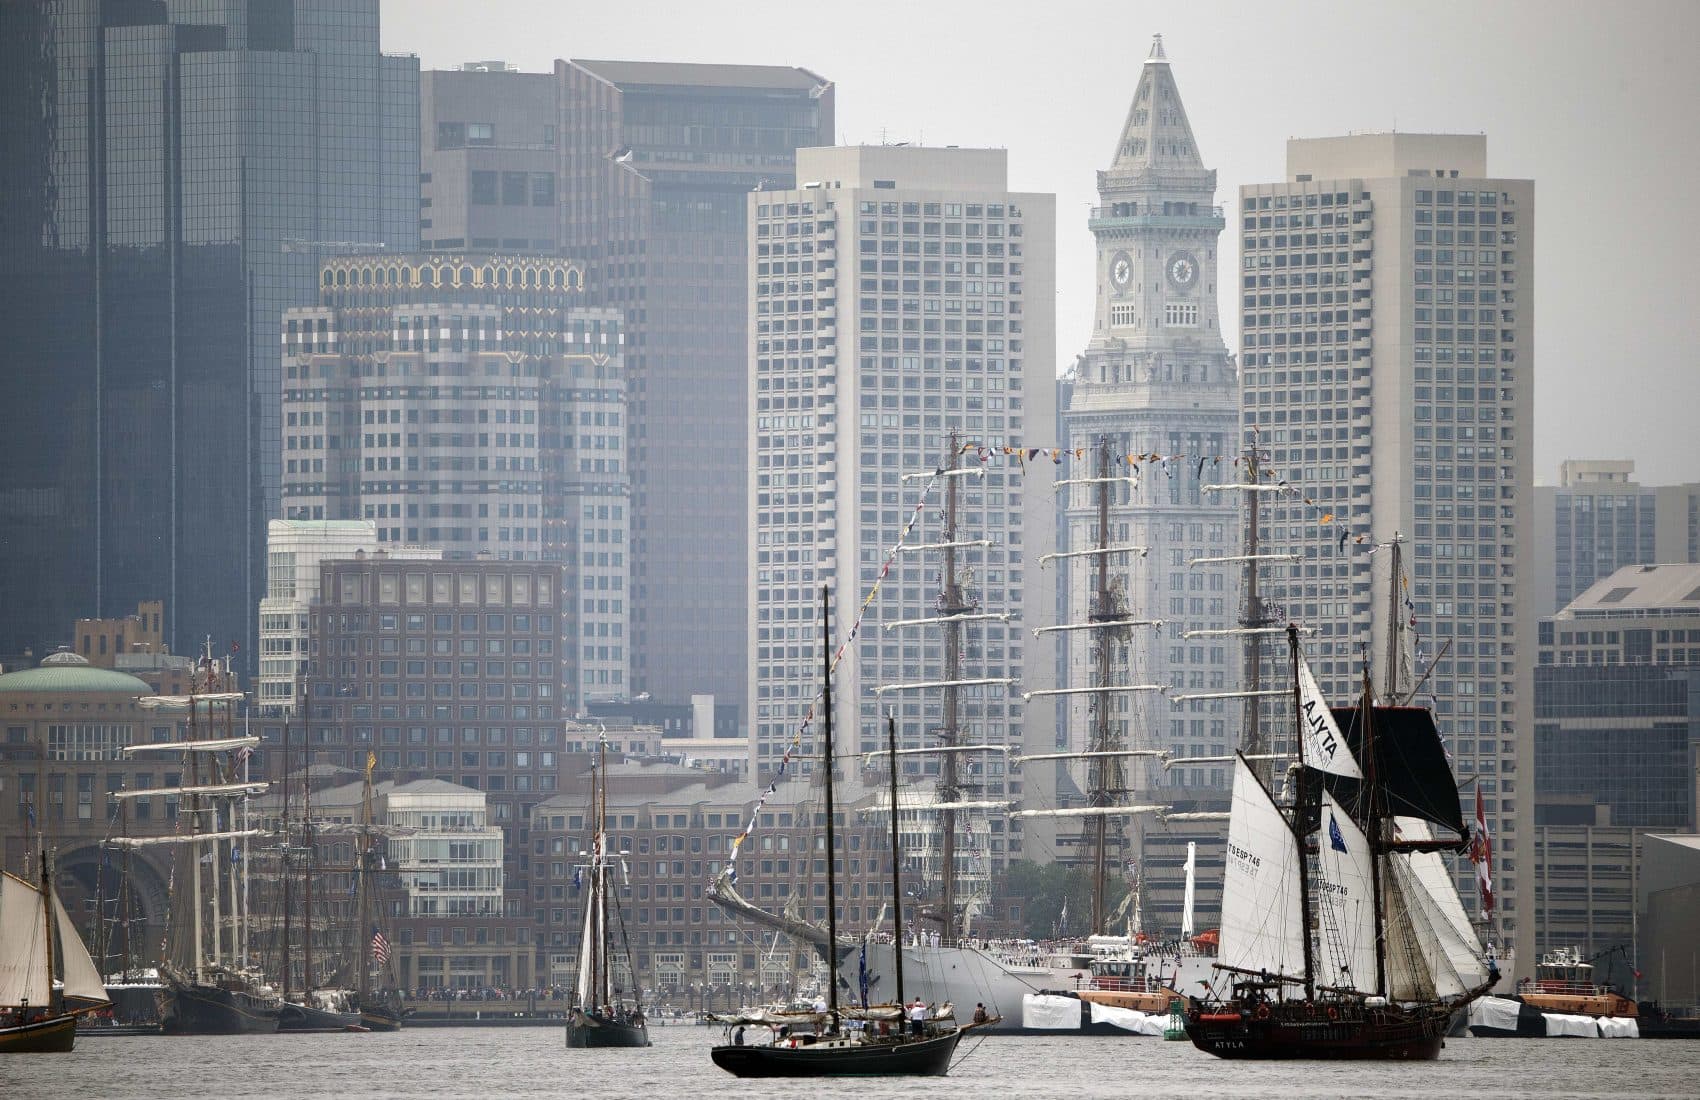 Tall ships pass in front of the skyline during Sail Boston's Parade of Sail on Saturday. (Michael Dwyer/AP)